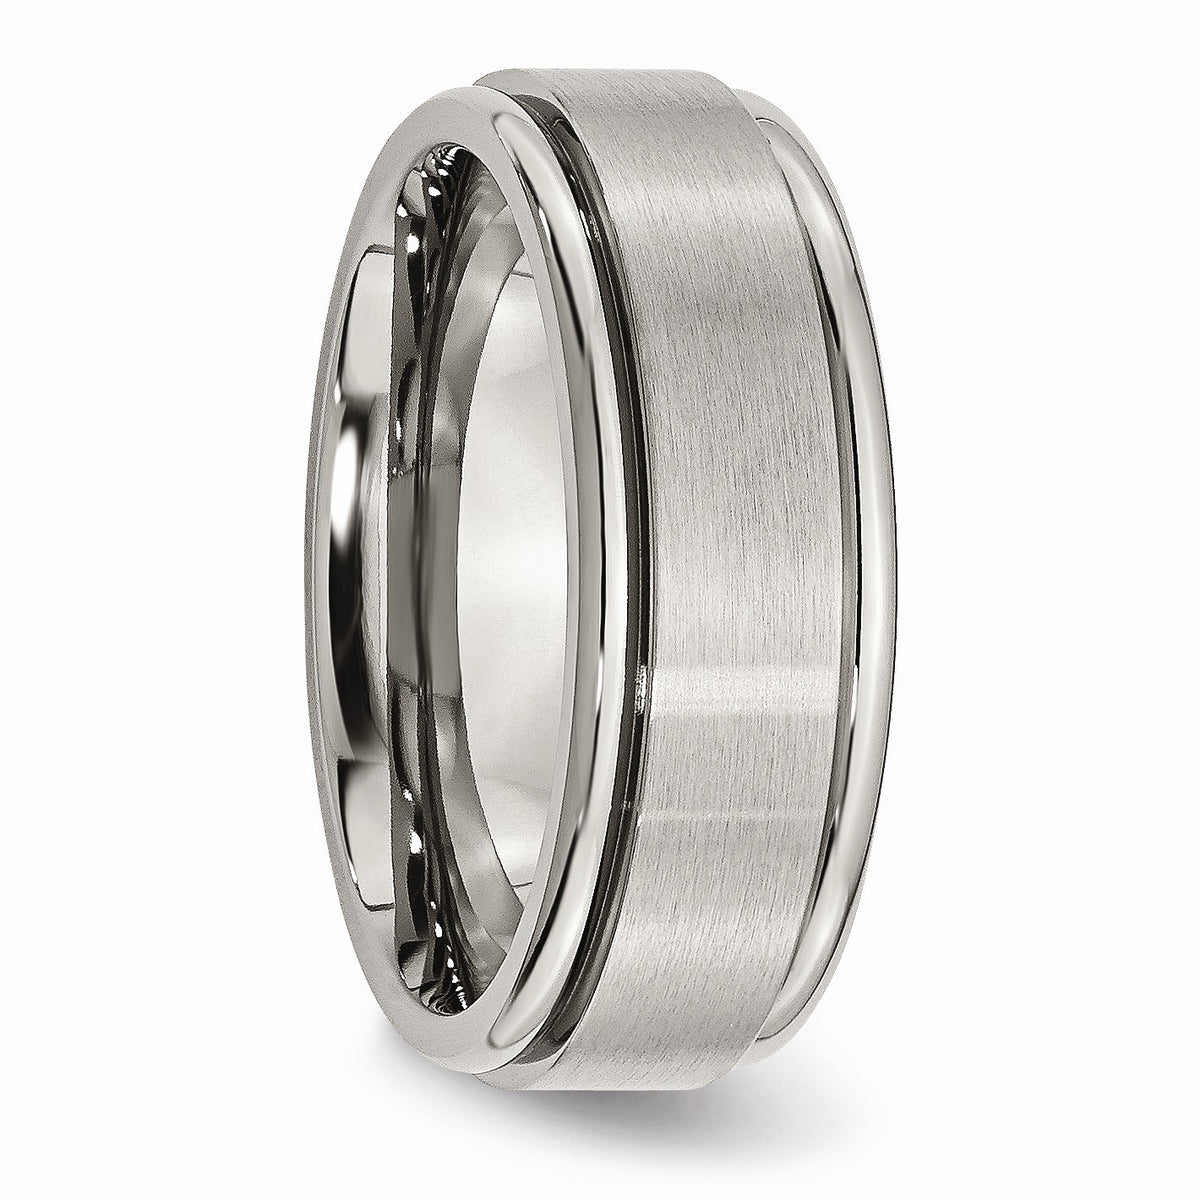 Alternate view of the Titanium Ridged Edge 8mm Dual Finish Band by The Black Bow Jewelry Co.